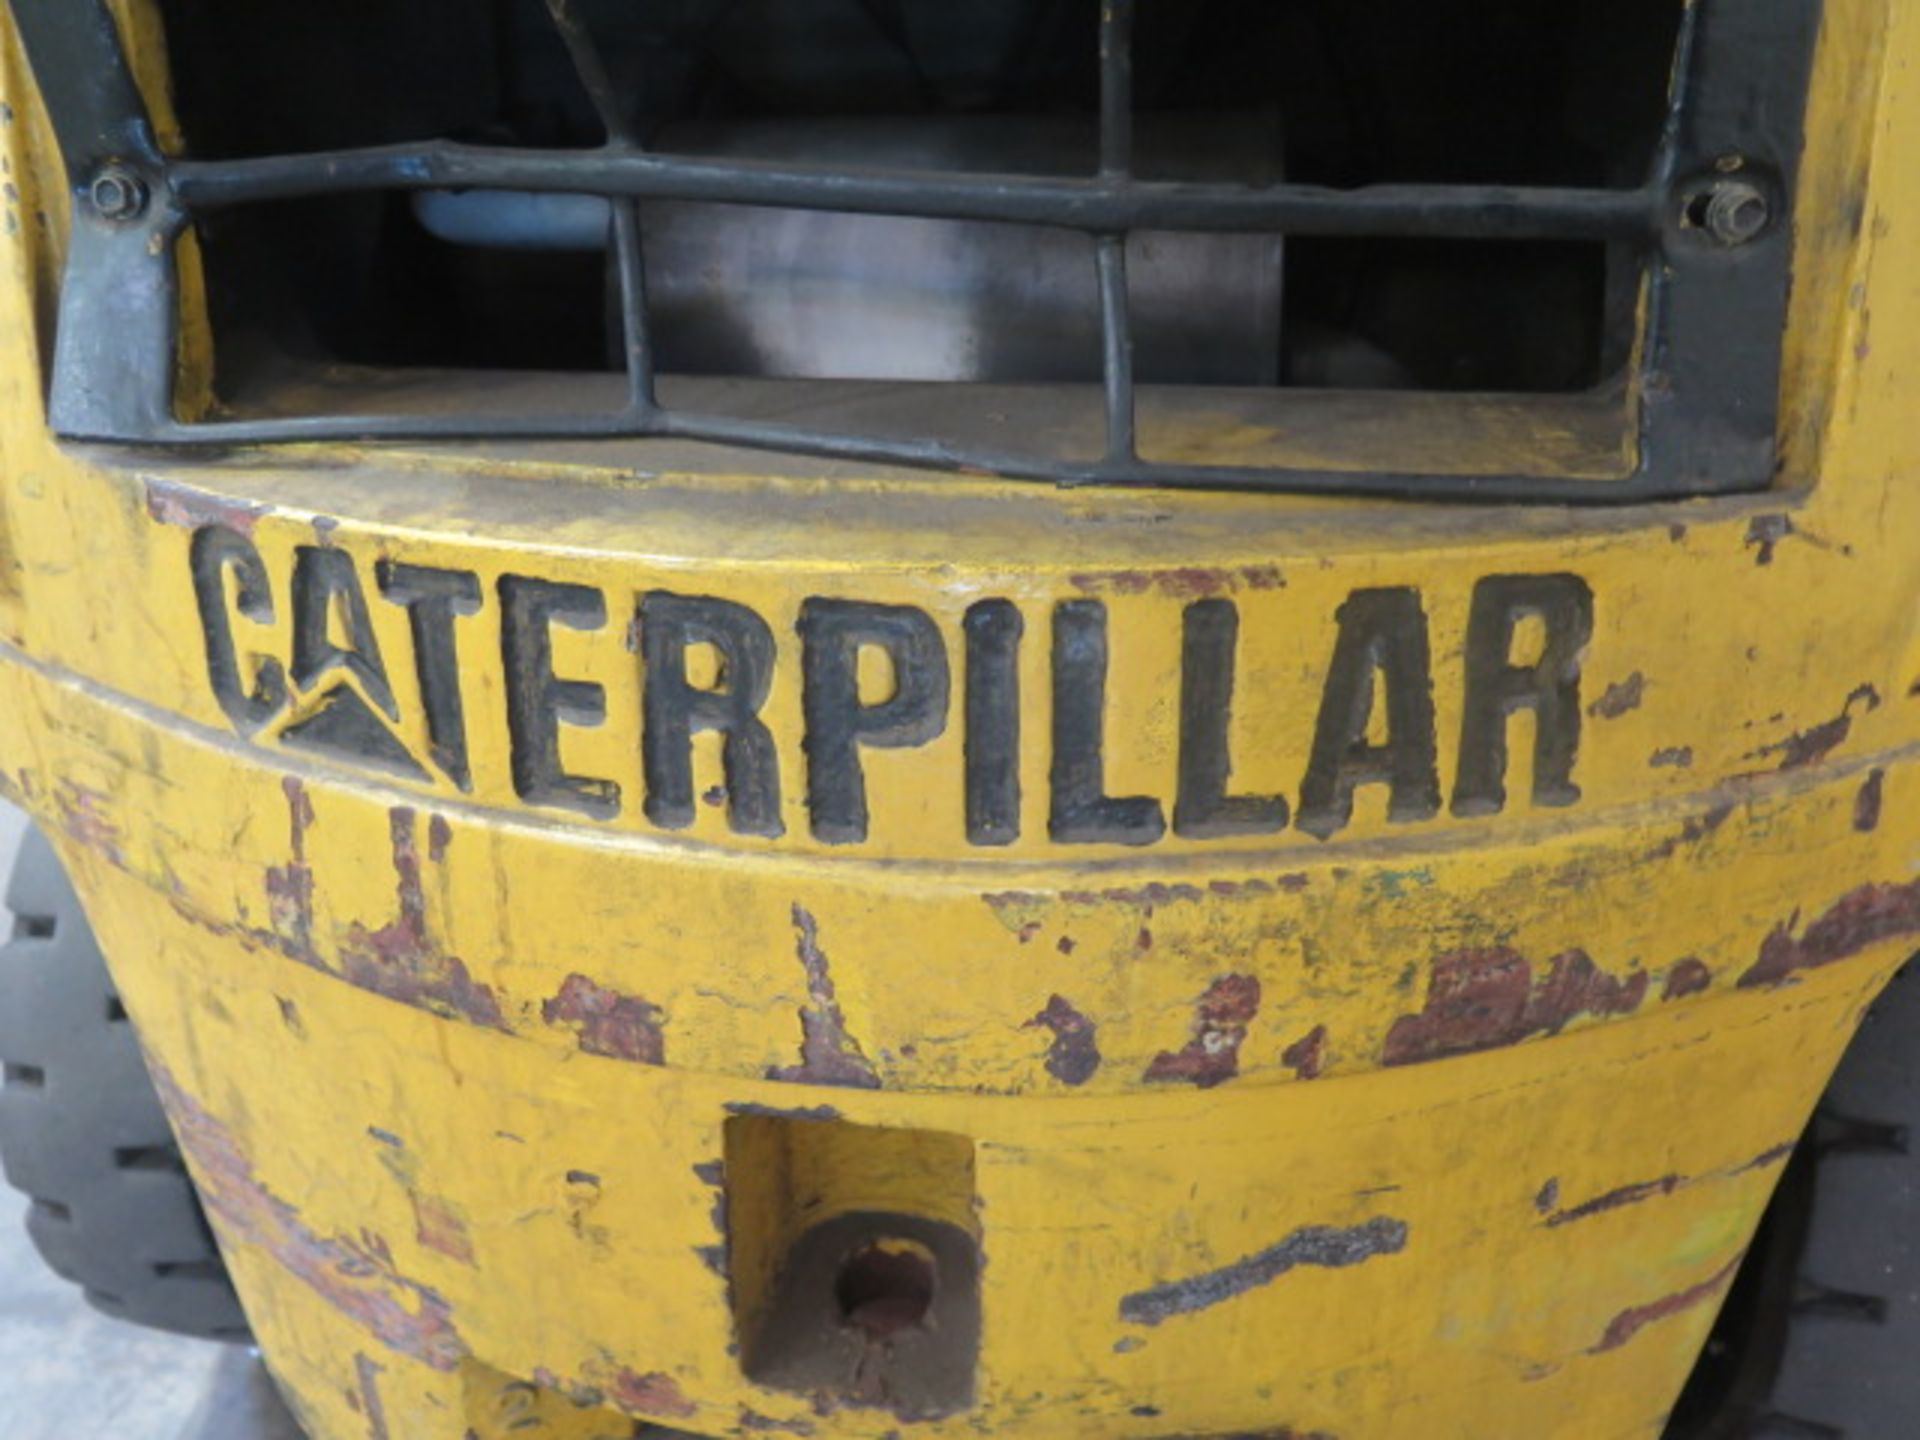 Caterpillar GP25 5000 Lb Cap LPG Forklift s/n 5AM07772 w/ 3-Stage Mast, 190” Lift Height, SOLD AS IS - Image 6 of 15